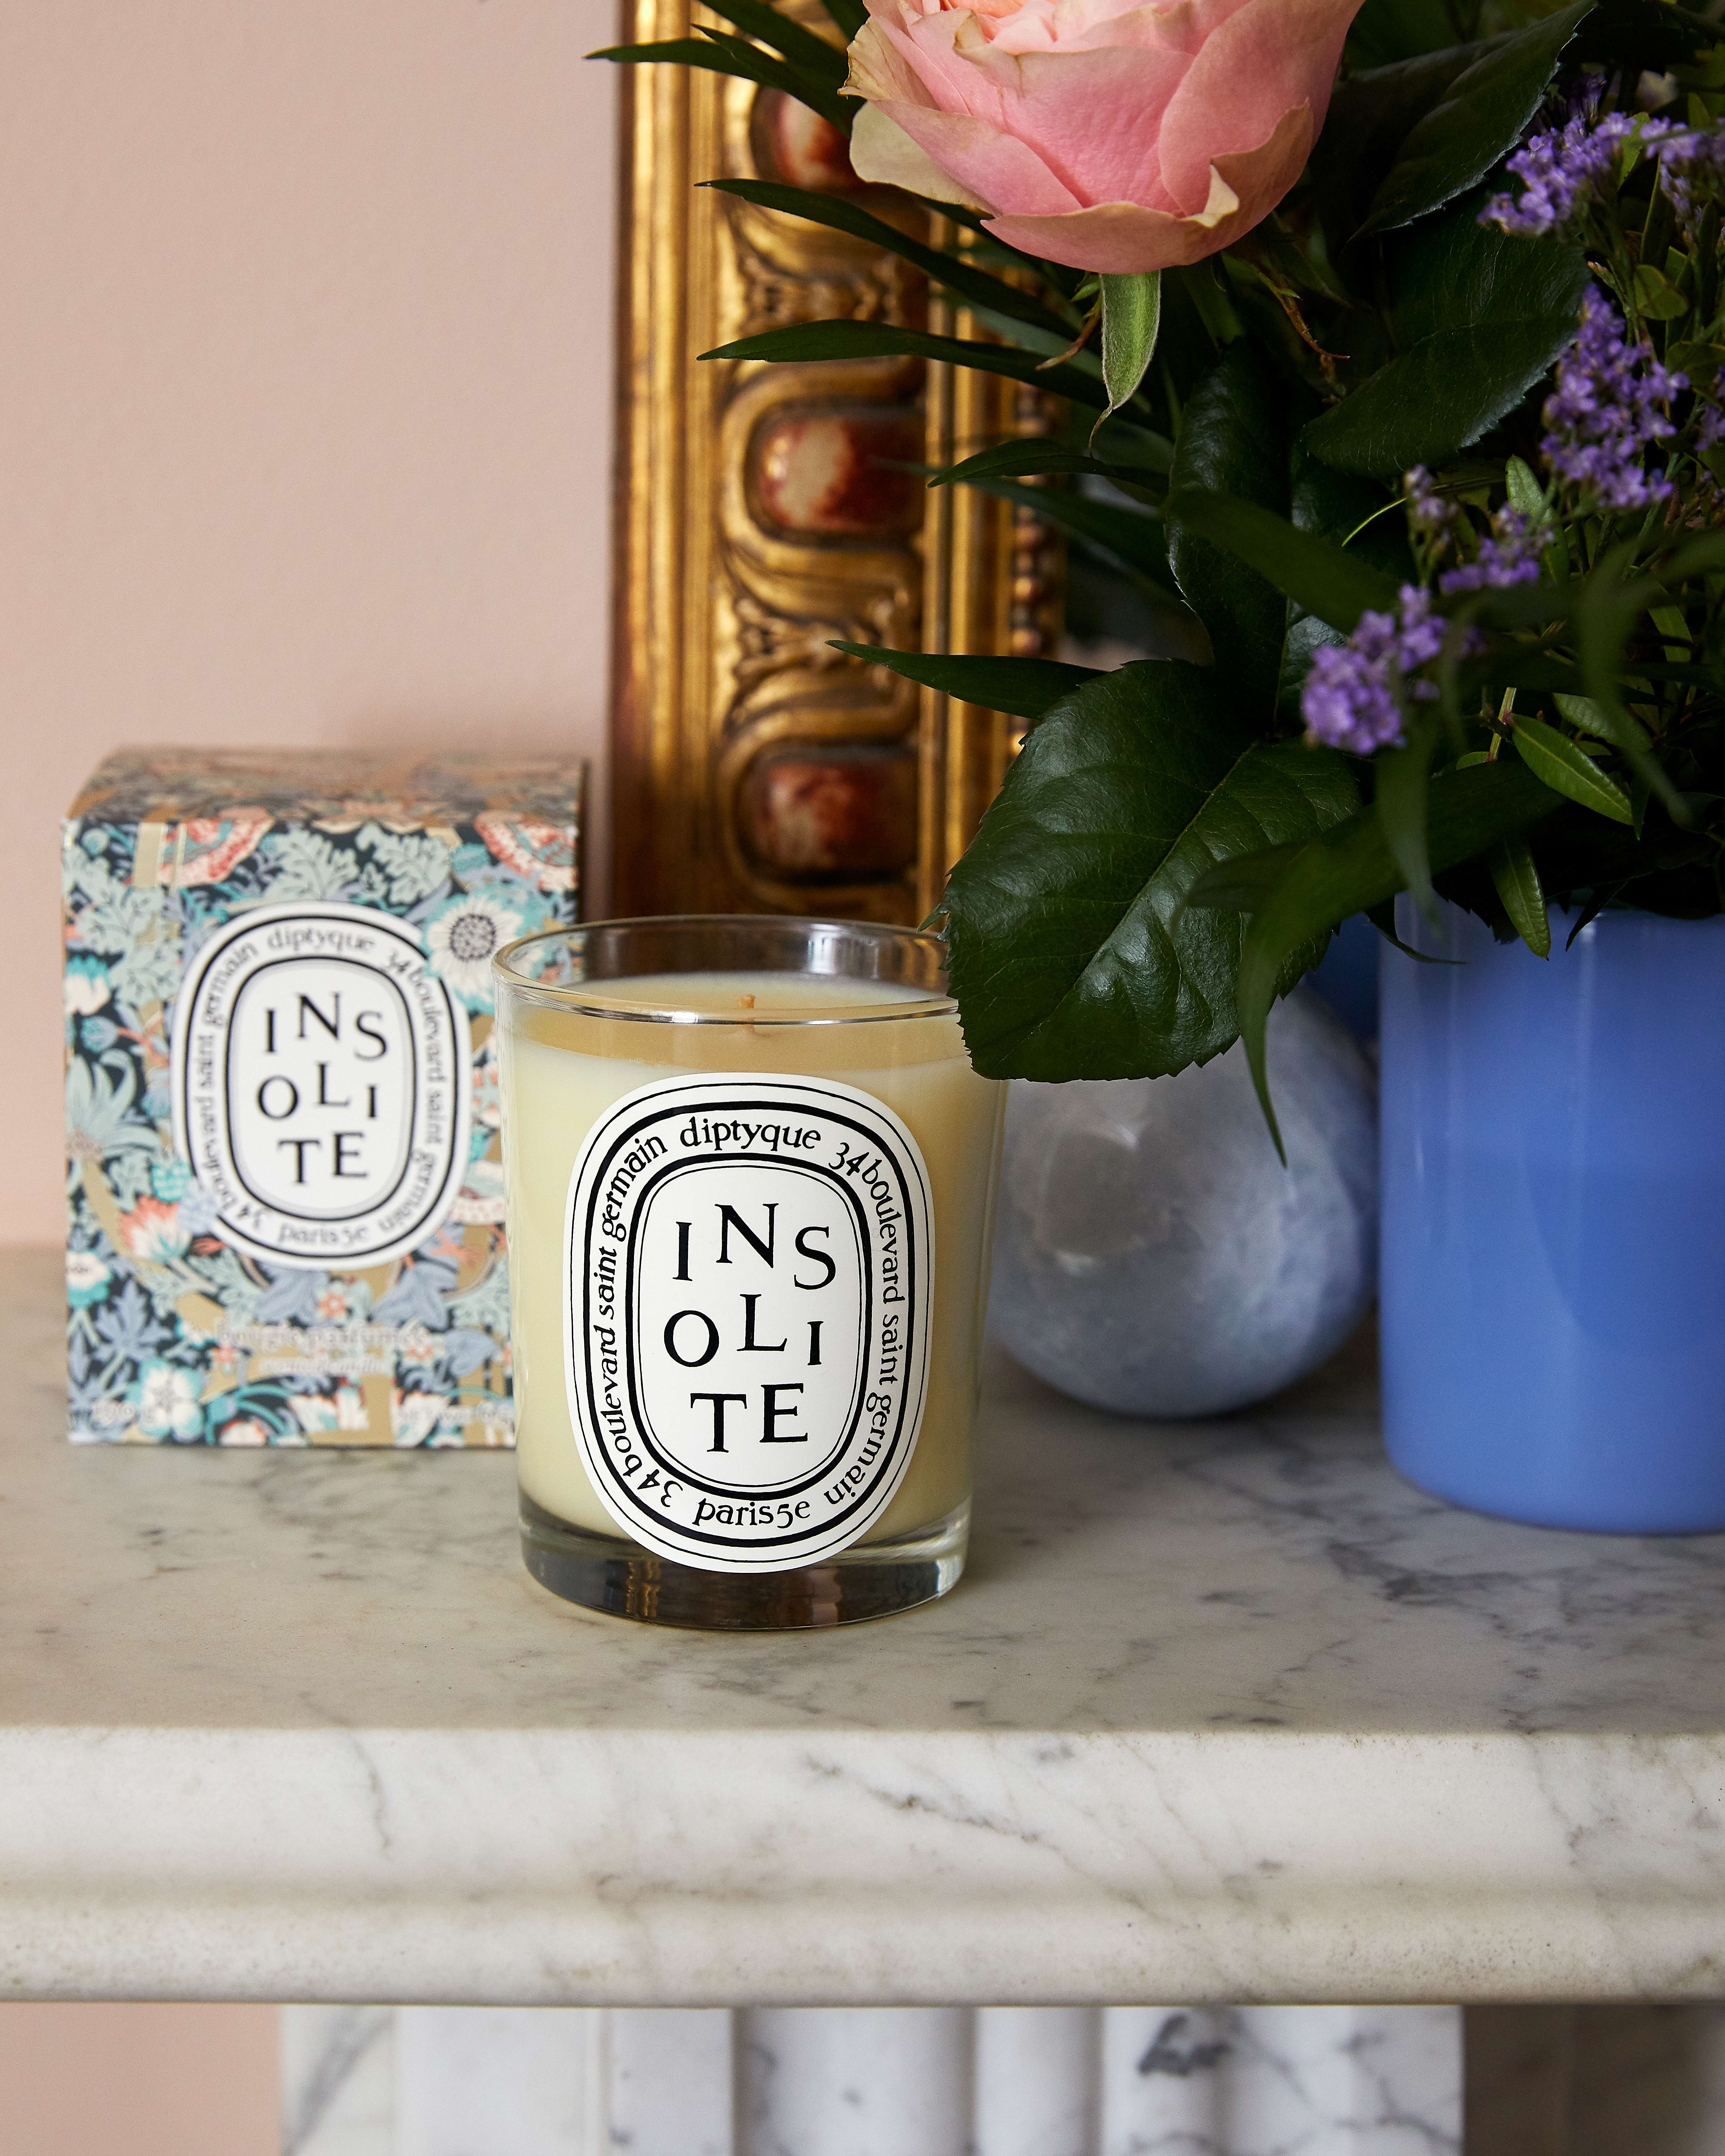 Diptyque Limited Edition Insolite Candle Review | Liberty